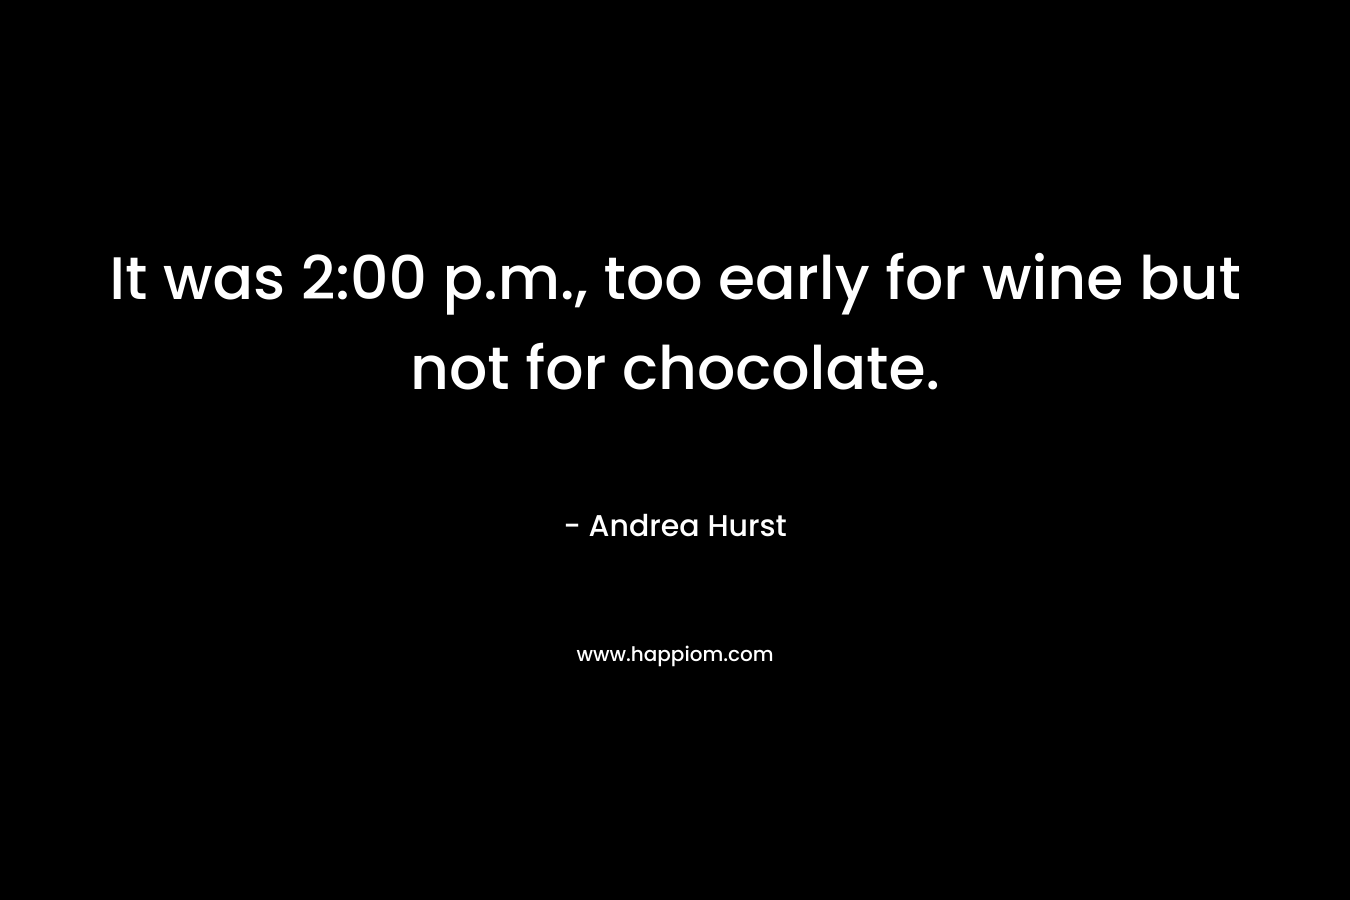 It was 2:00 p.m., too early for wine but not for chocolate. – Andrea Hurst